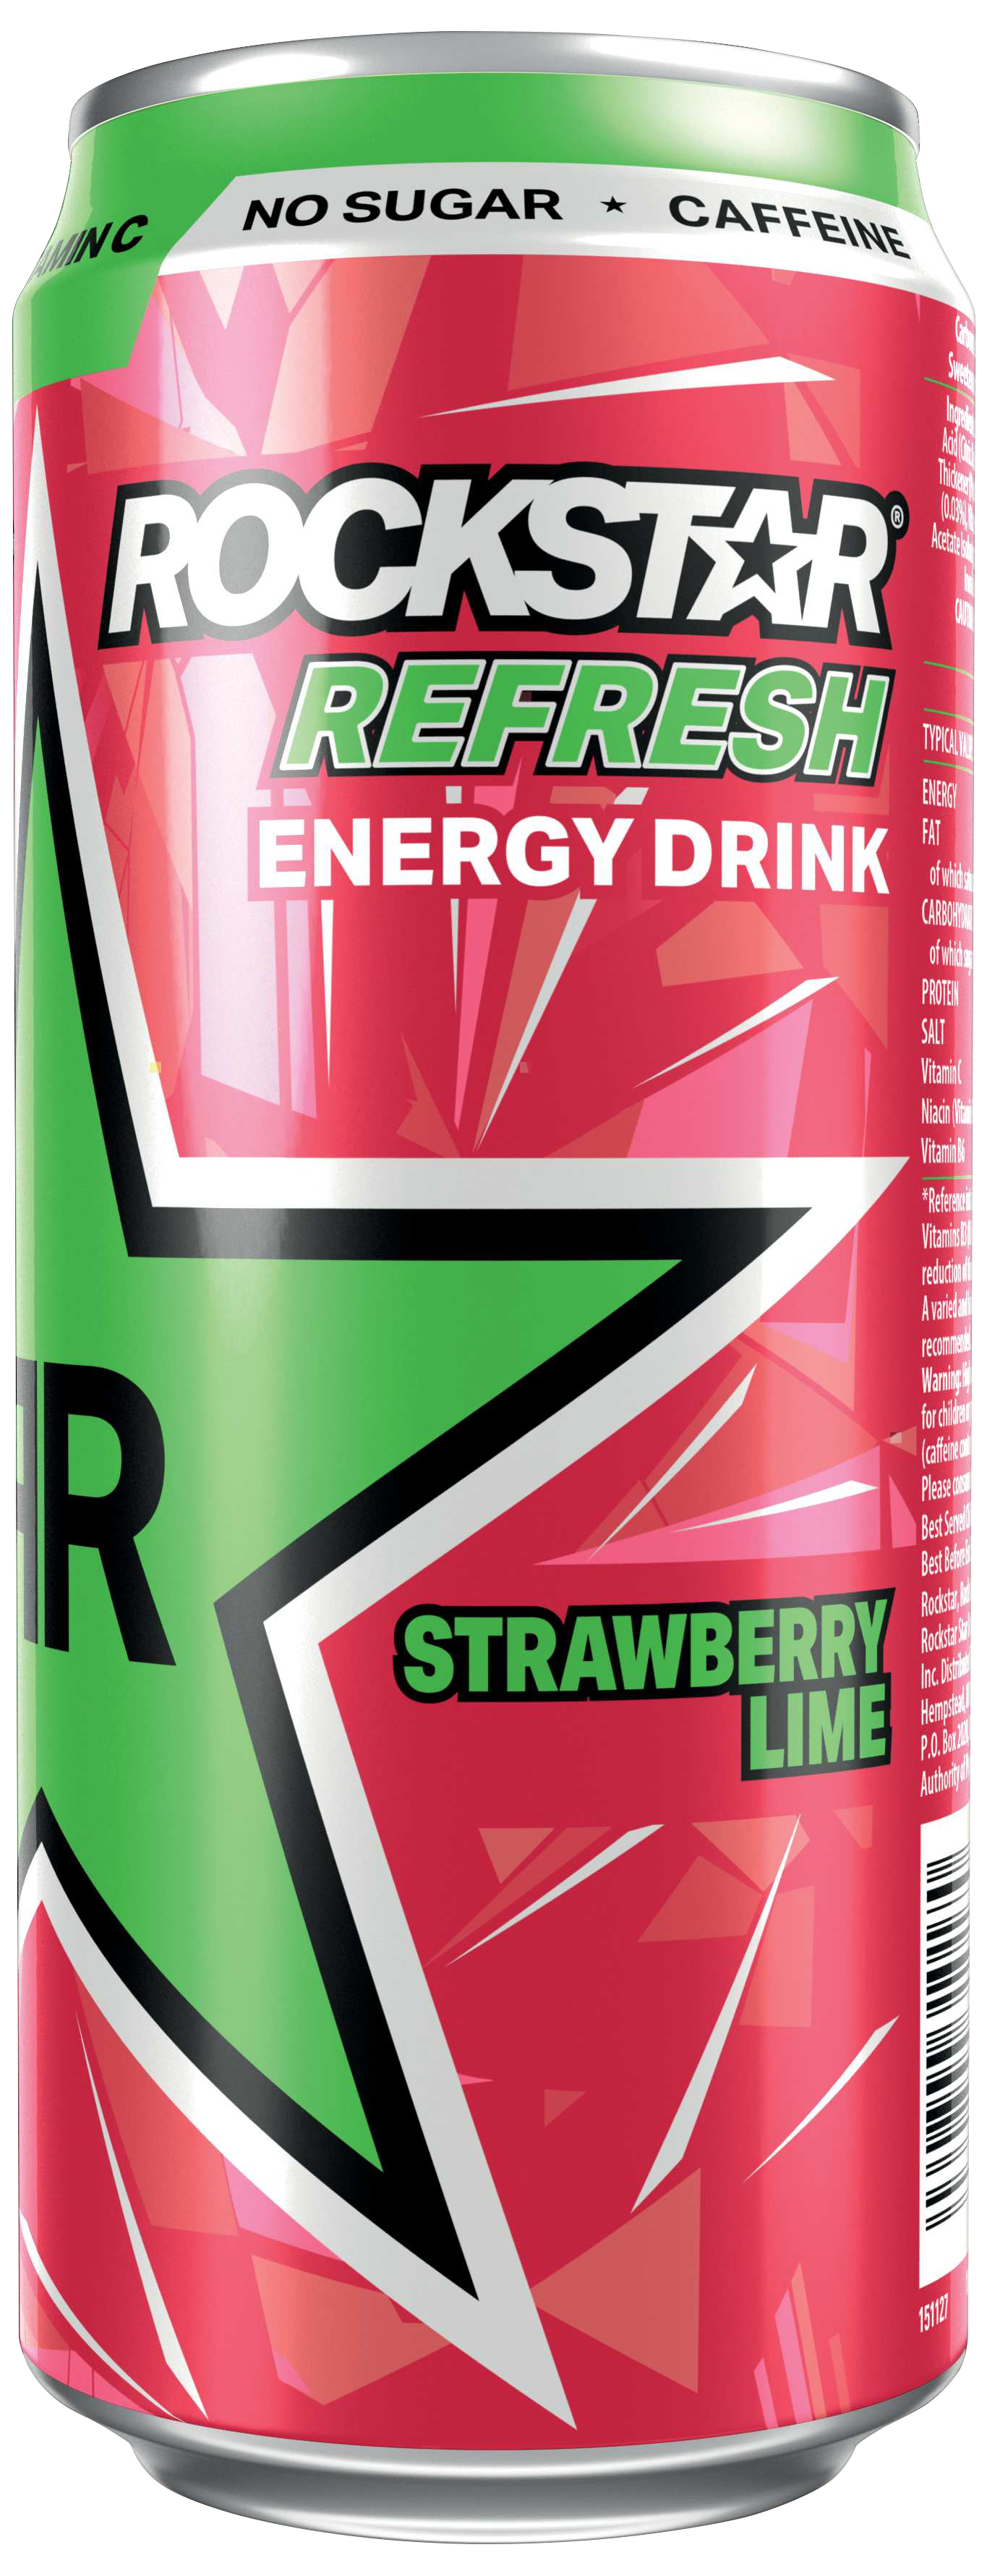 Rockstar Energy Drink Refresh Strawberry and Lime Nutrition